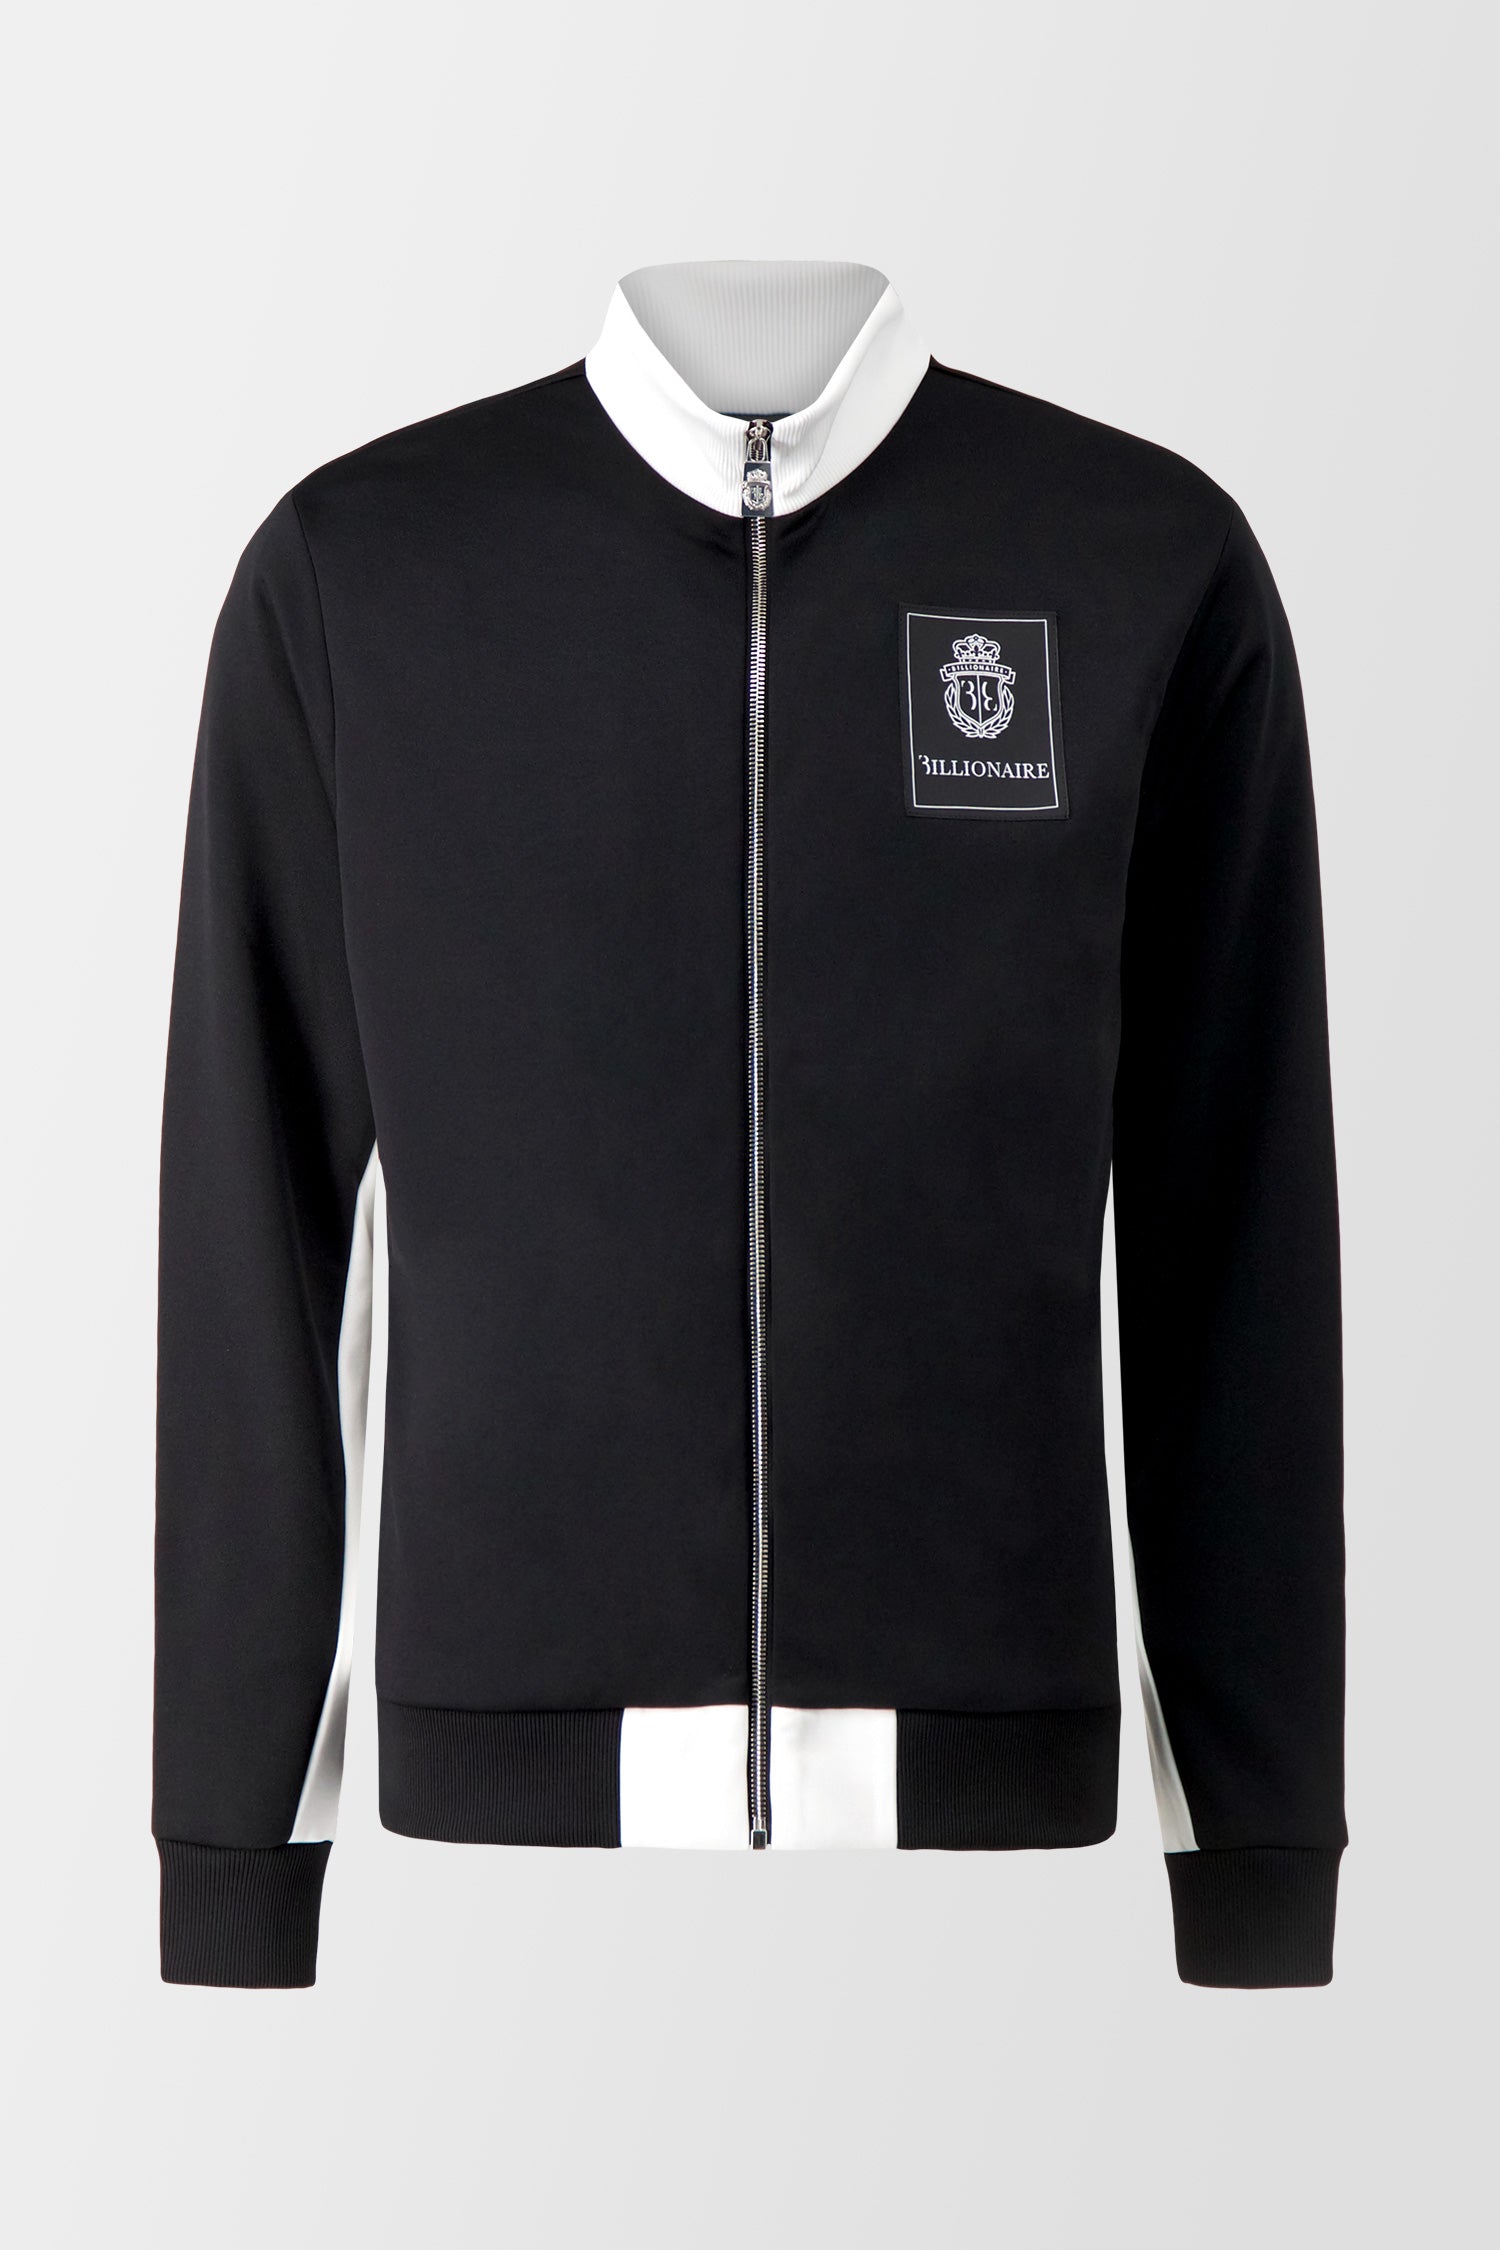 Shop Branded Luxury Men's Tracksuits From Top Designers